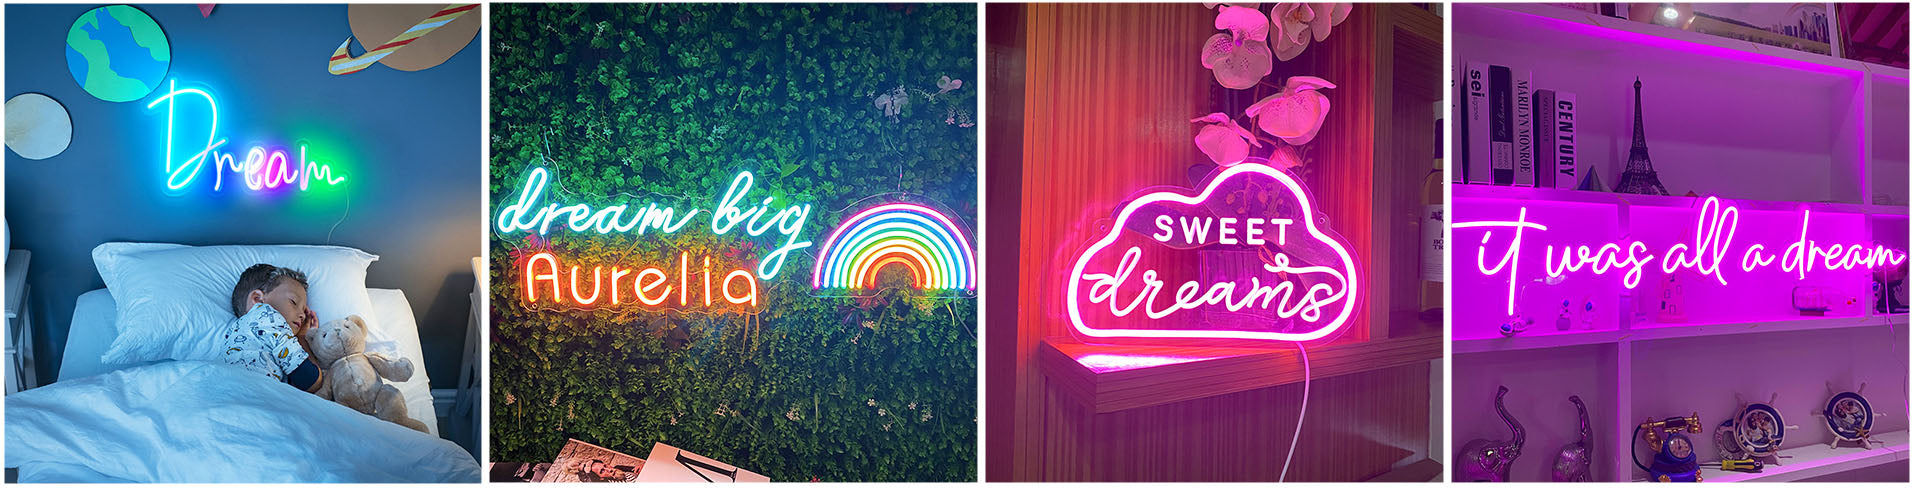 dream glowing sign